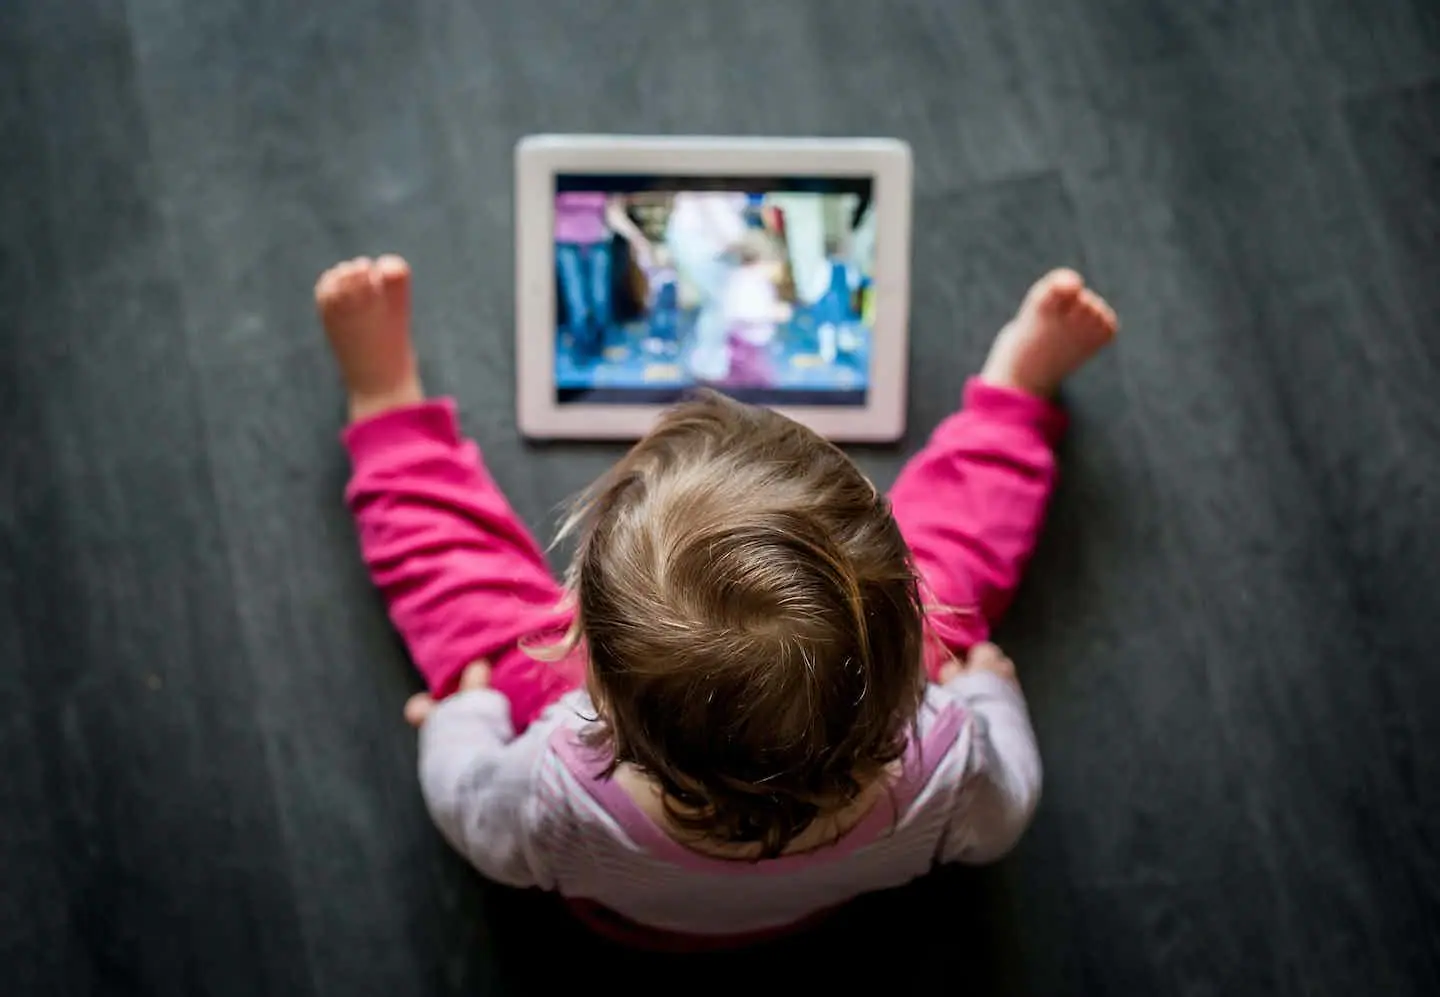 Heart damage Another reason to cut down on children’s screen time